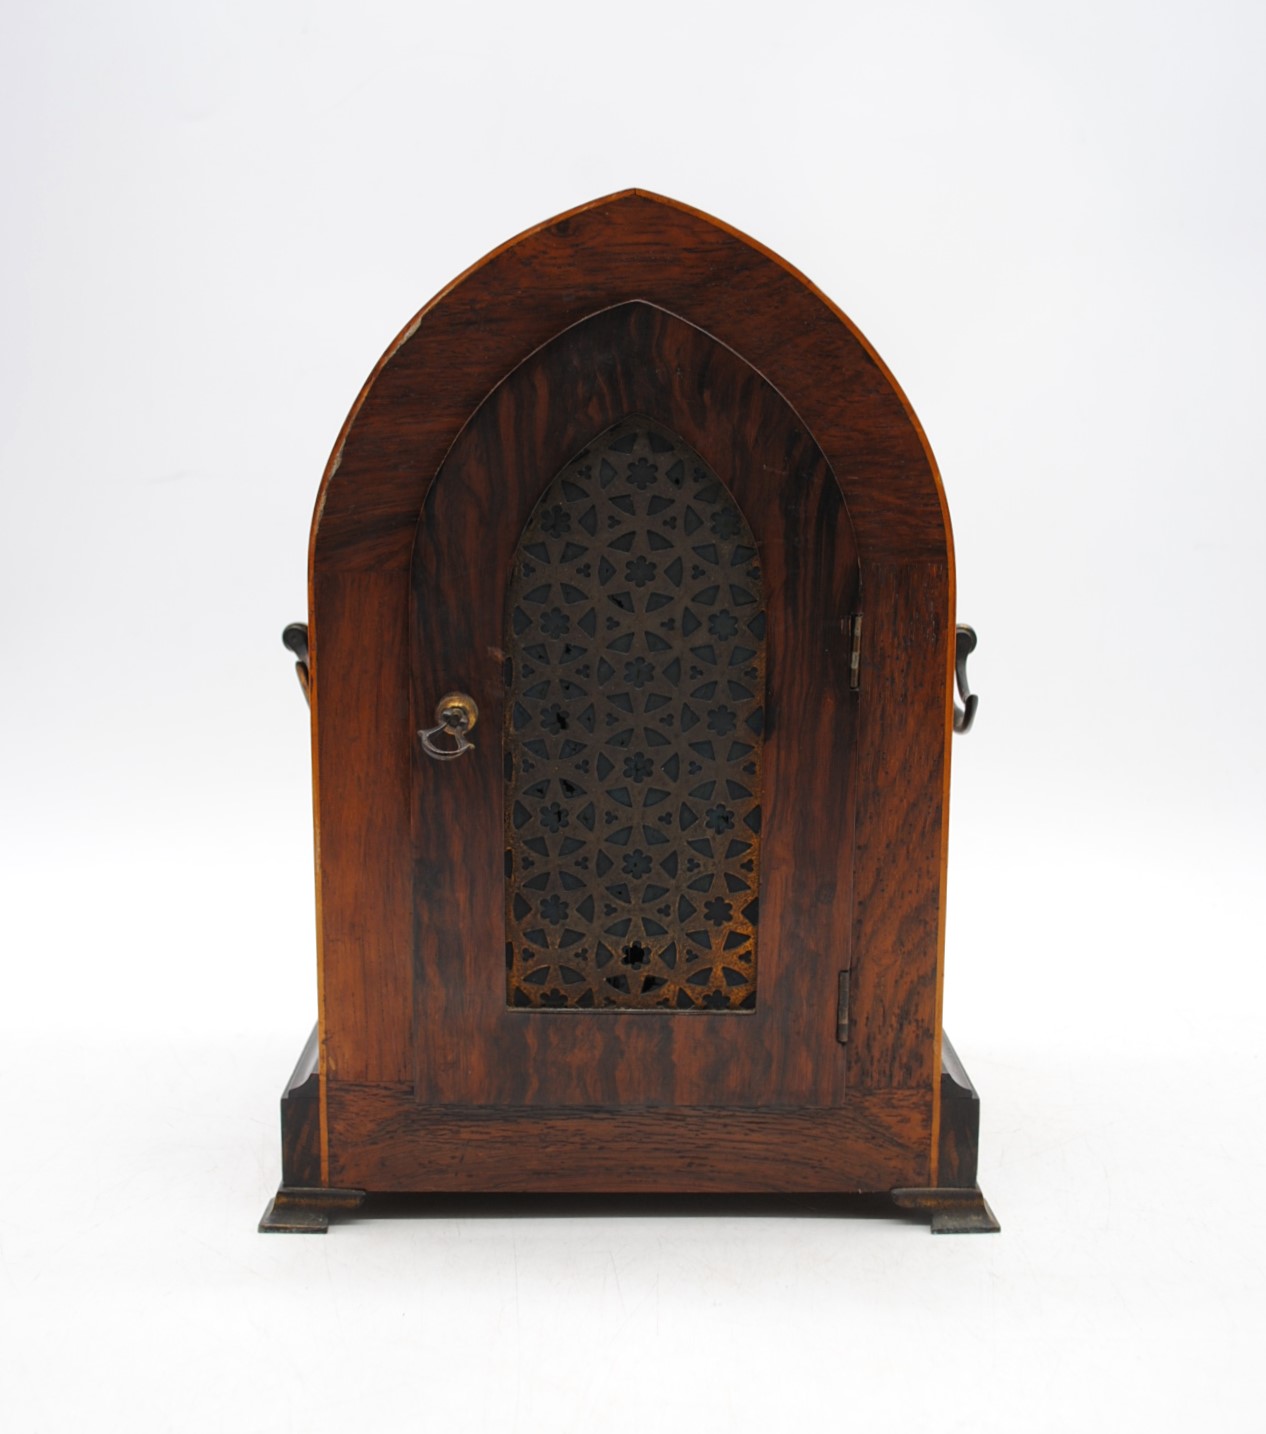 An Edwardian inlaid mantel clock, with keys - Image 7 of 11